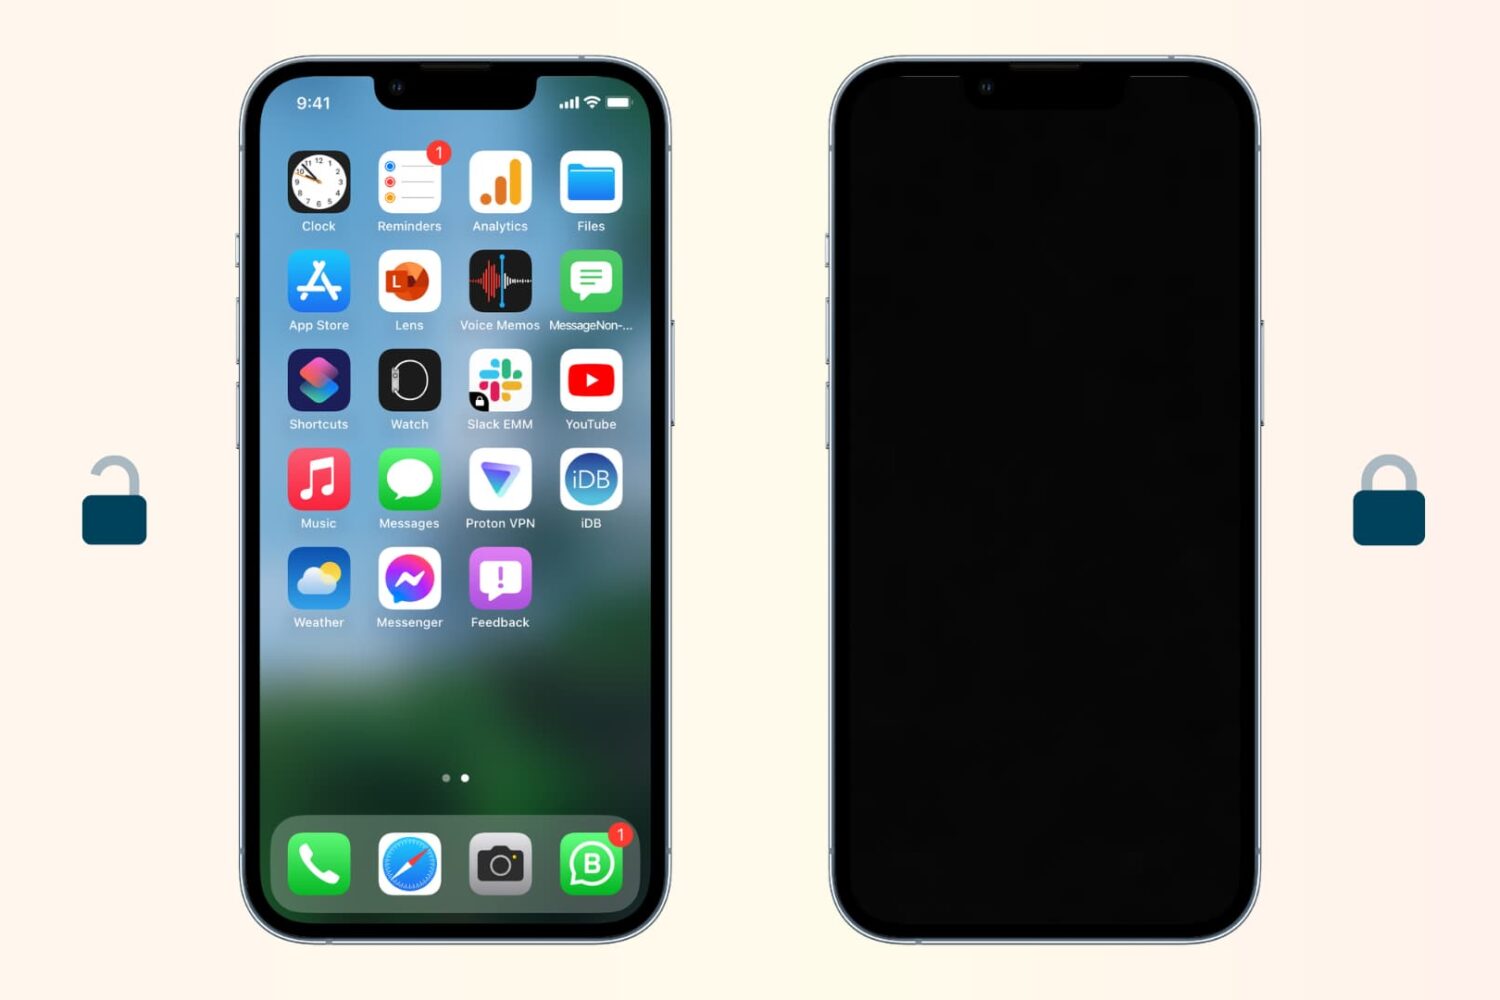 Unlocked iPhone on Home Screen and a locked iPhone showing the black screen